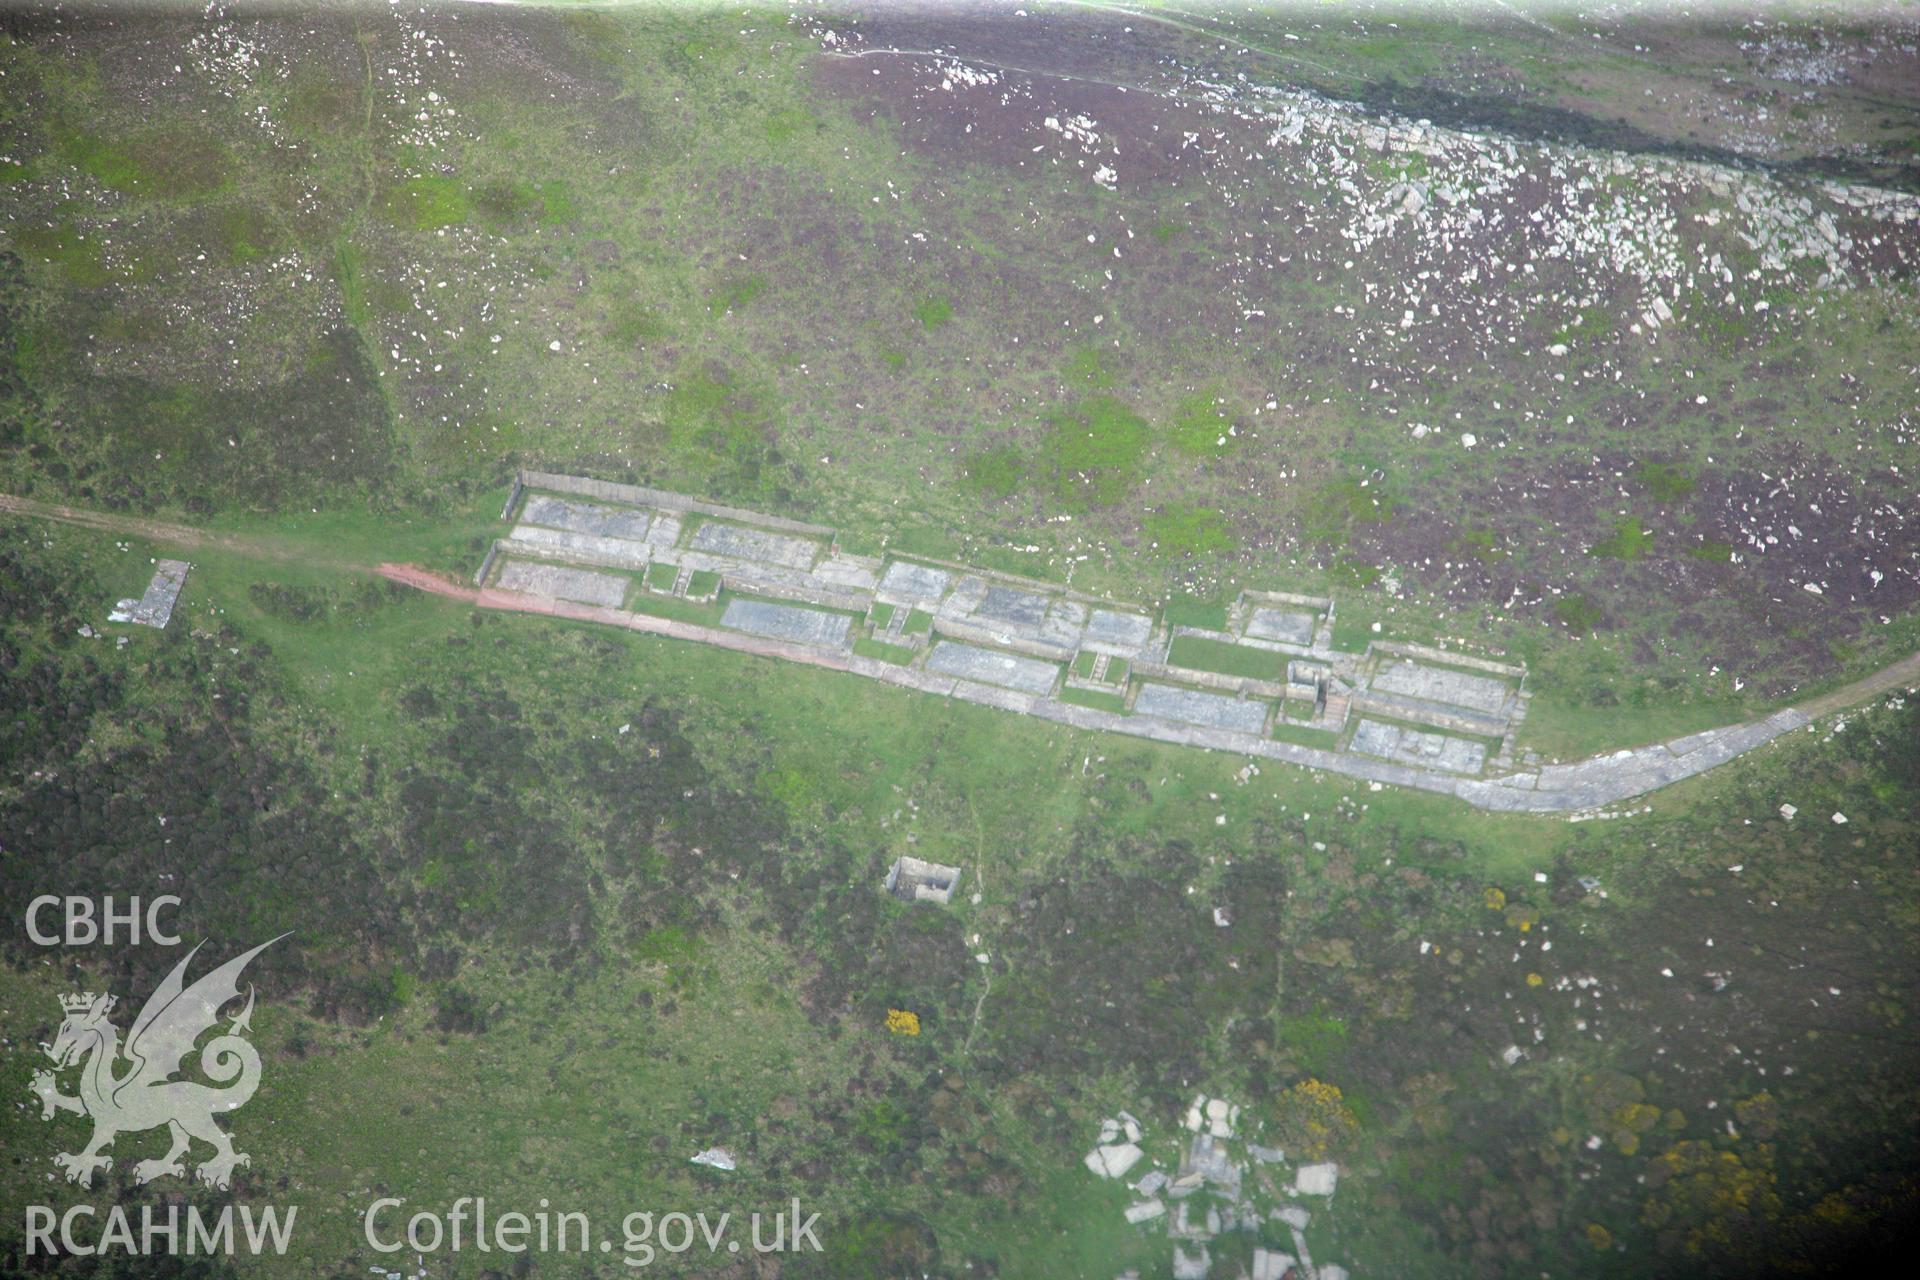 RCAHMW colour oblique photograph of Rhossili Down radar station. Taken by Toby Driver and Oliver Davies on 04/05/2011.